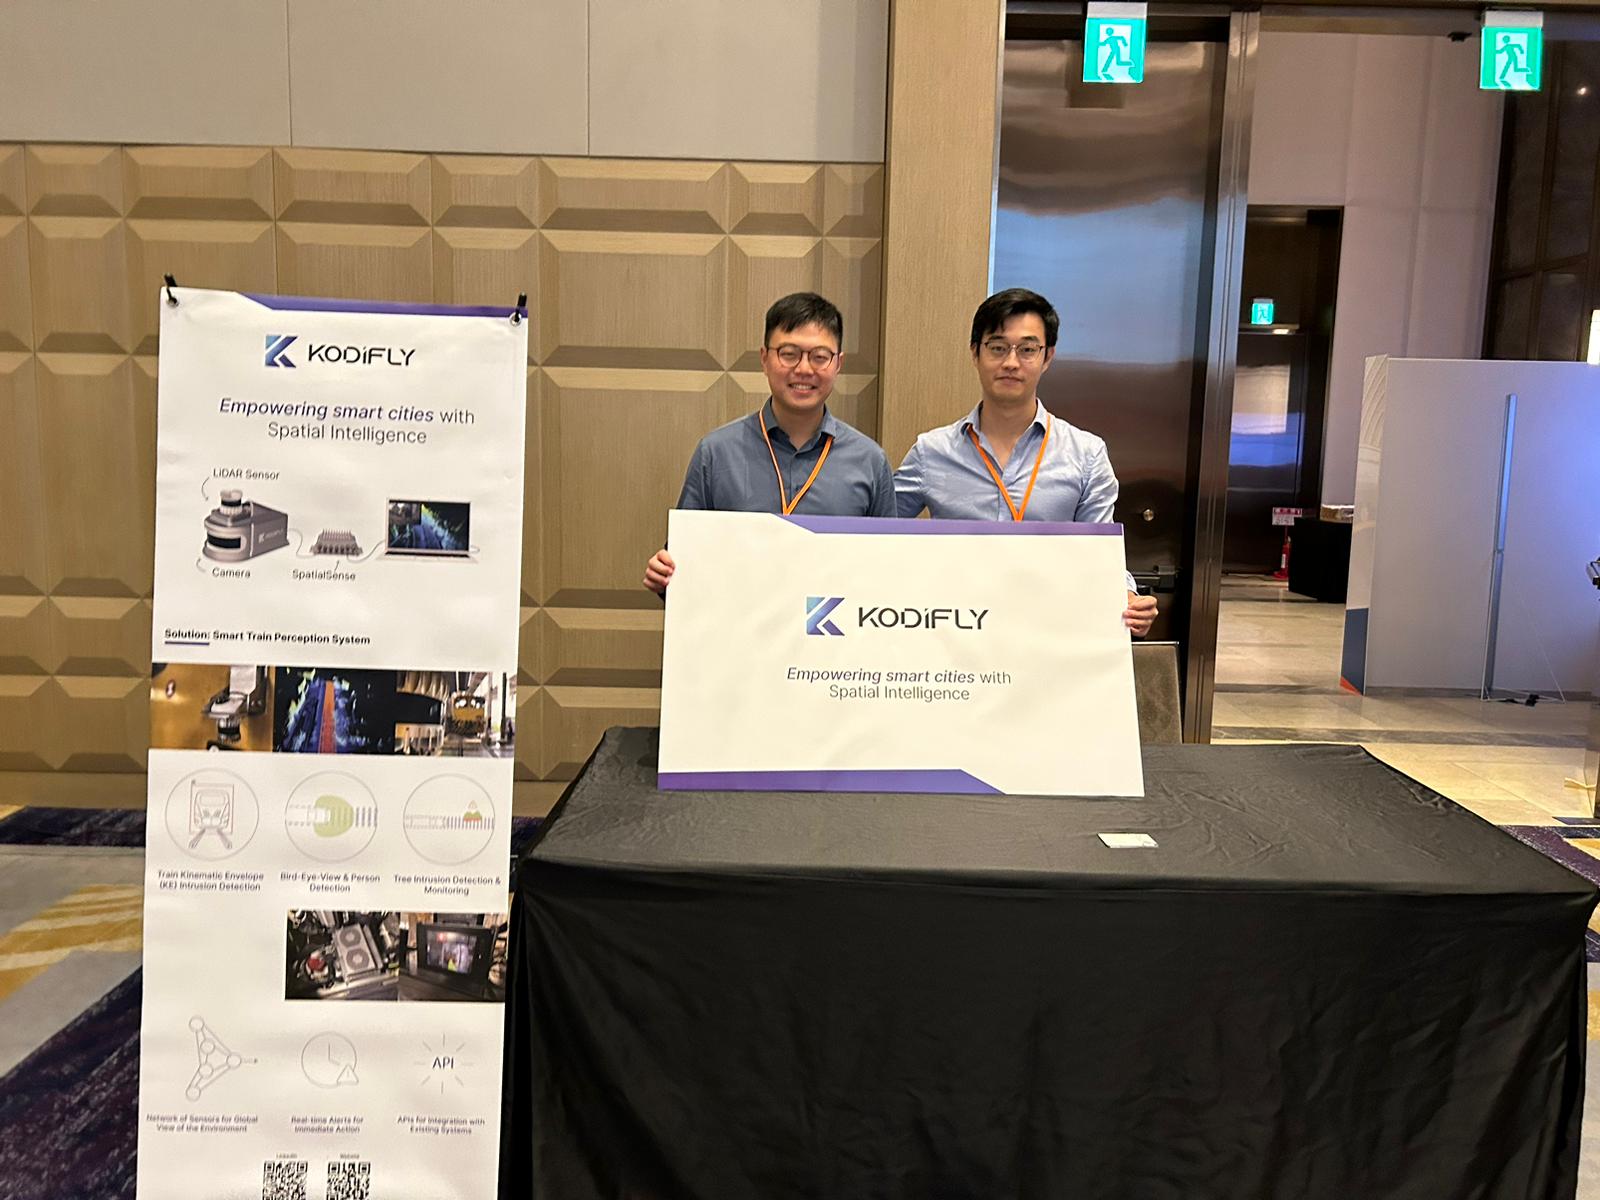 Kodifly's booth at AppWork Demo Day